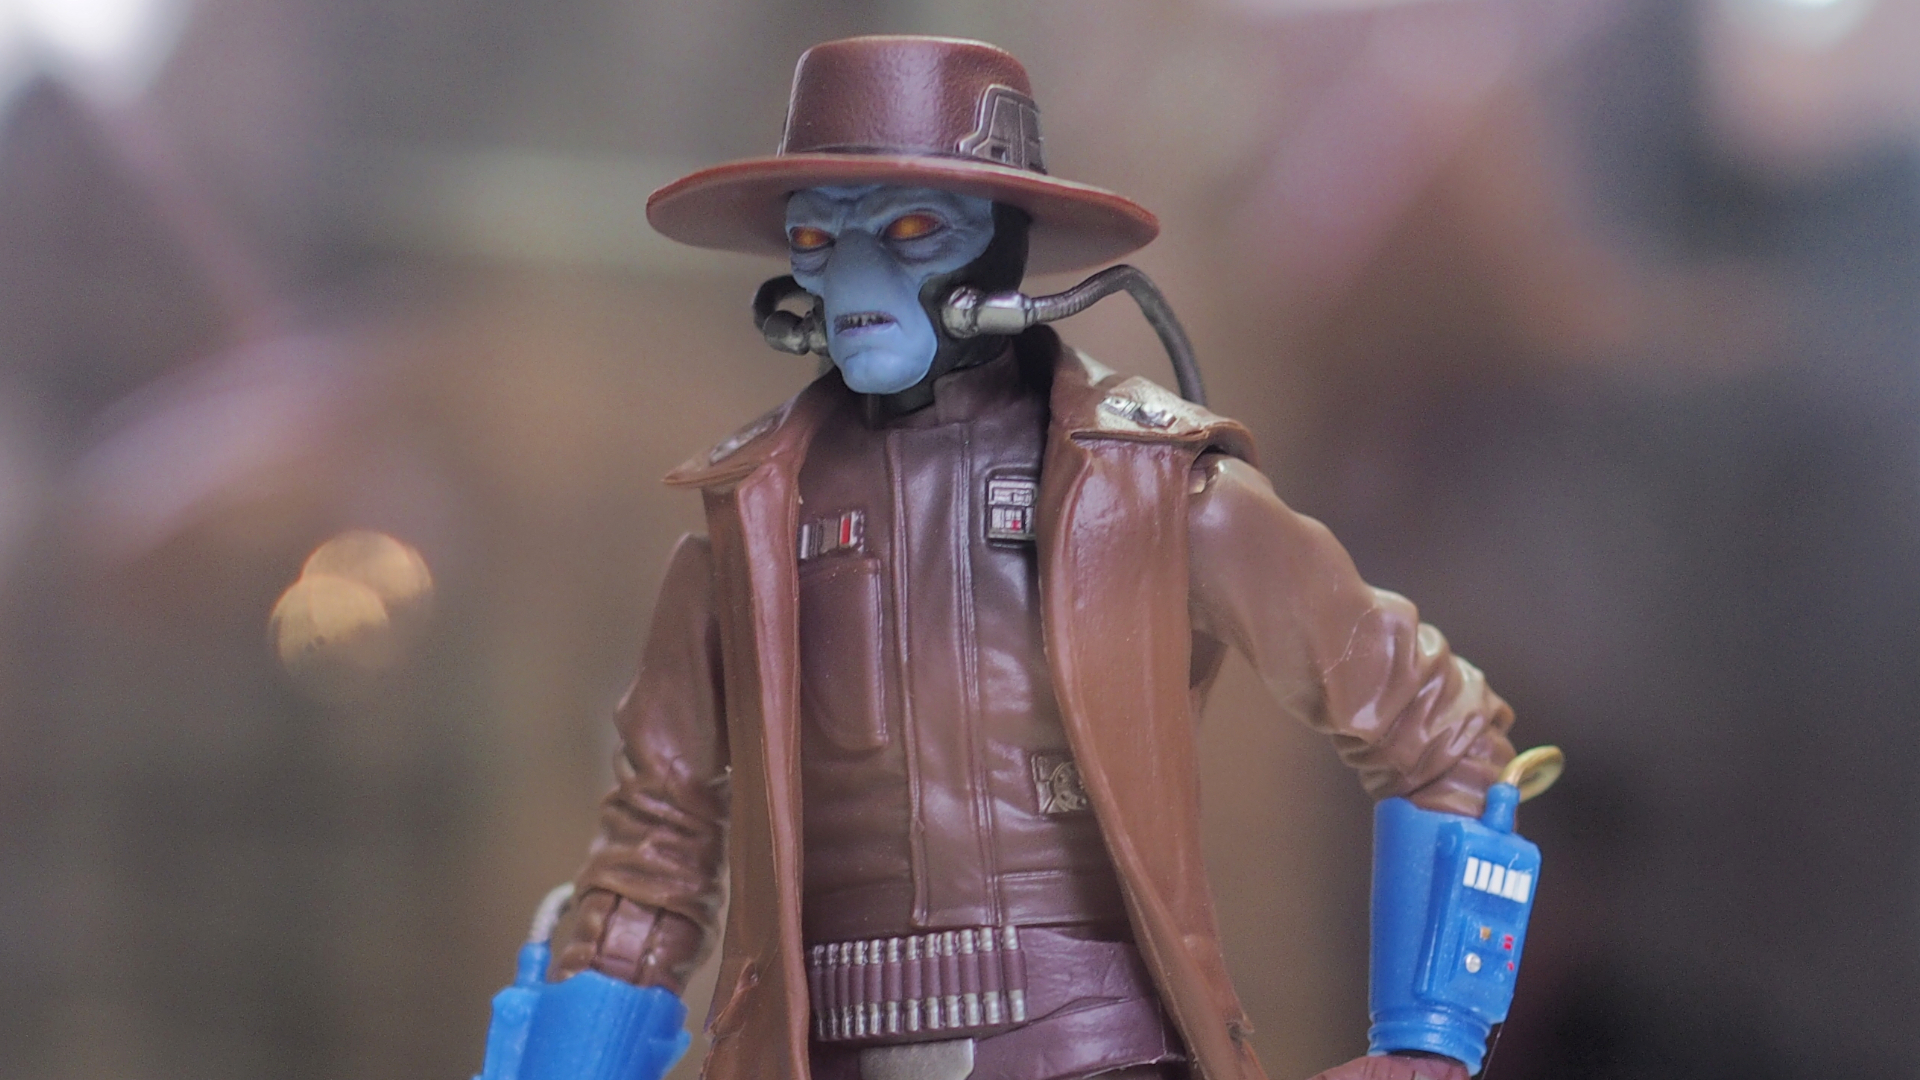 An action figure of Cad Bane stands ready